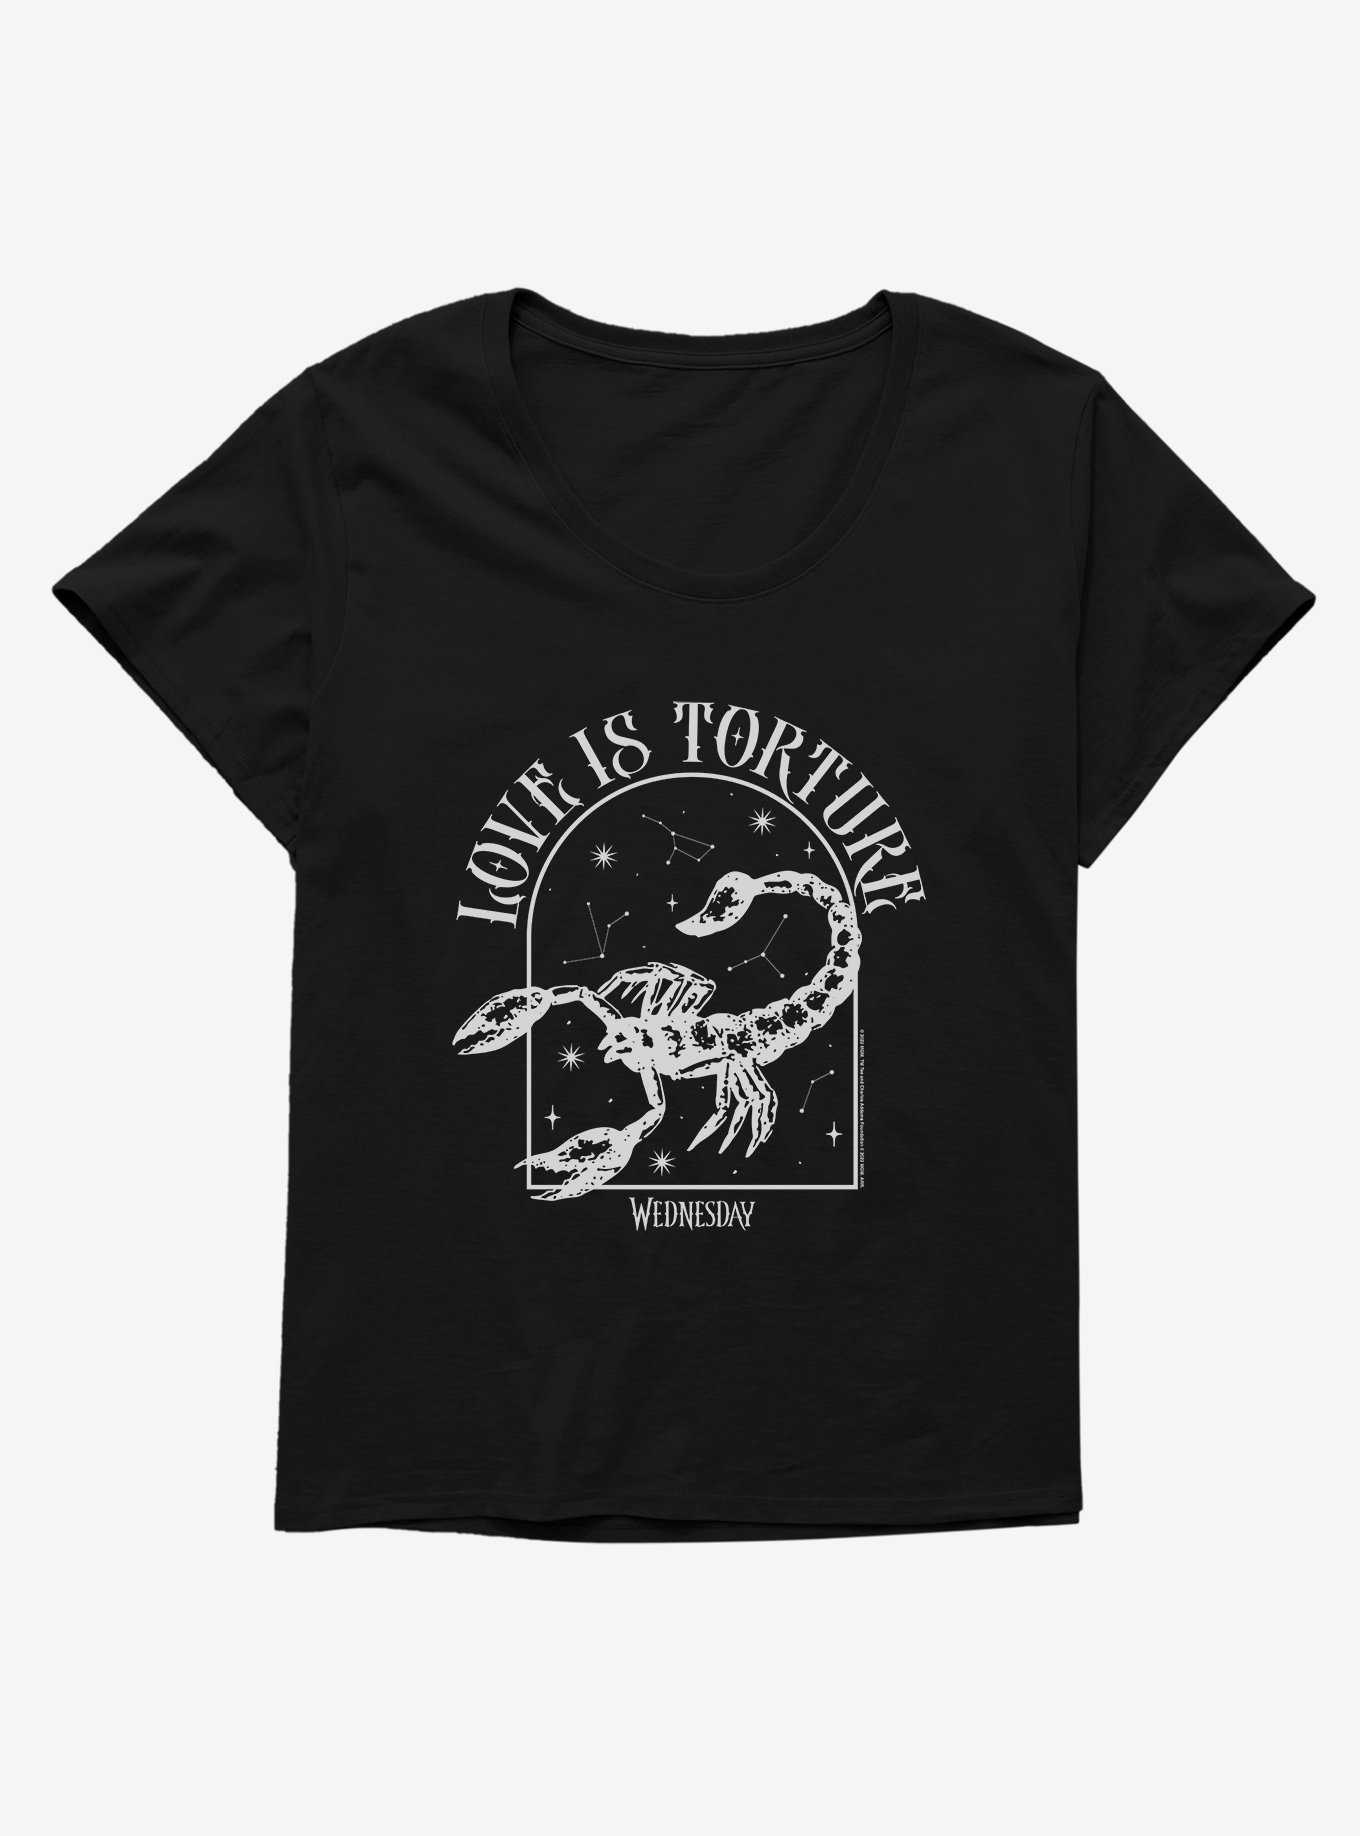 Wednesday Love Is Torture Womens T-Shirt Plus Size, , hi-res